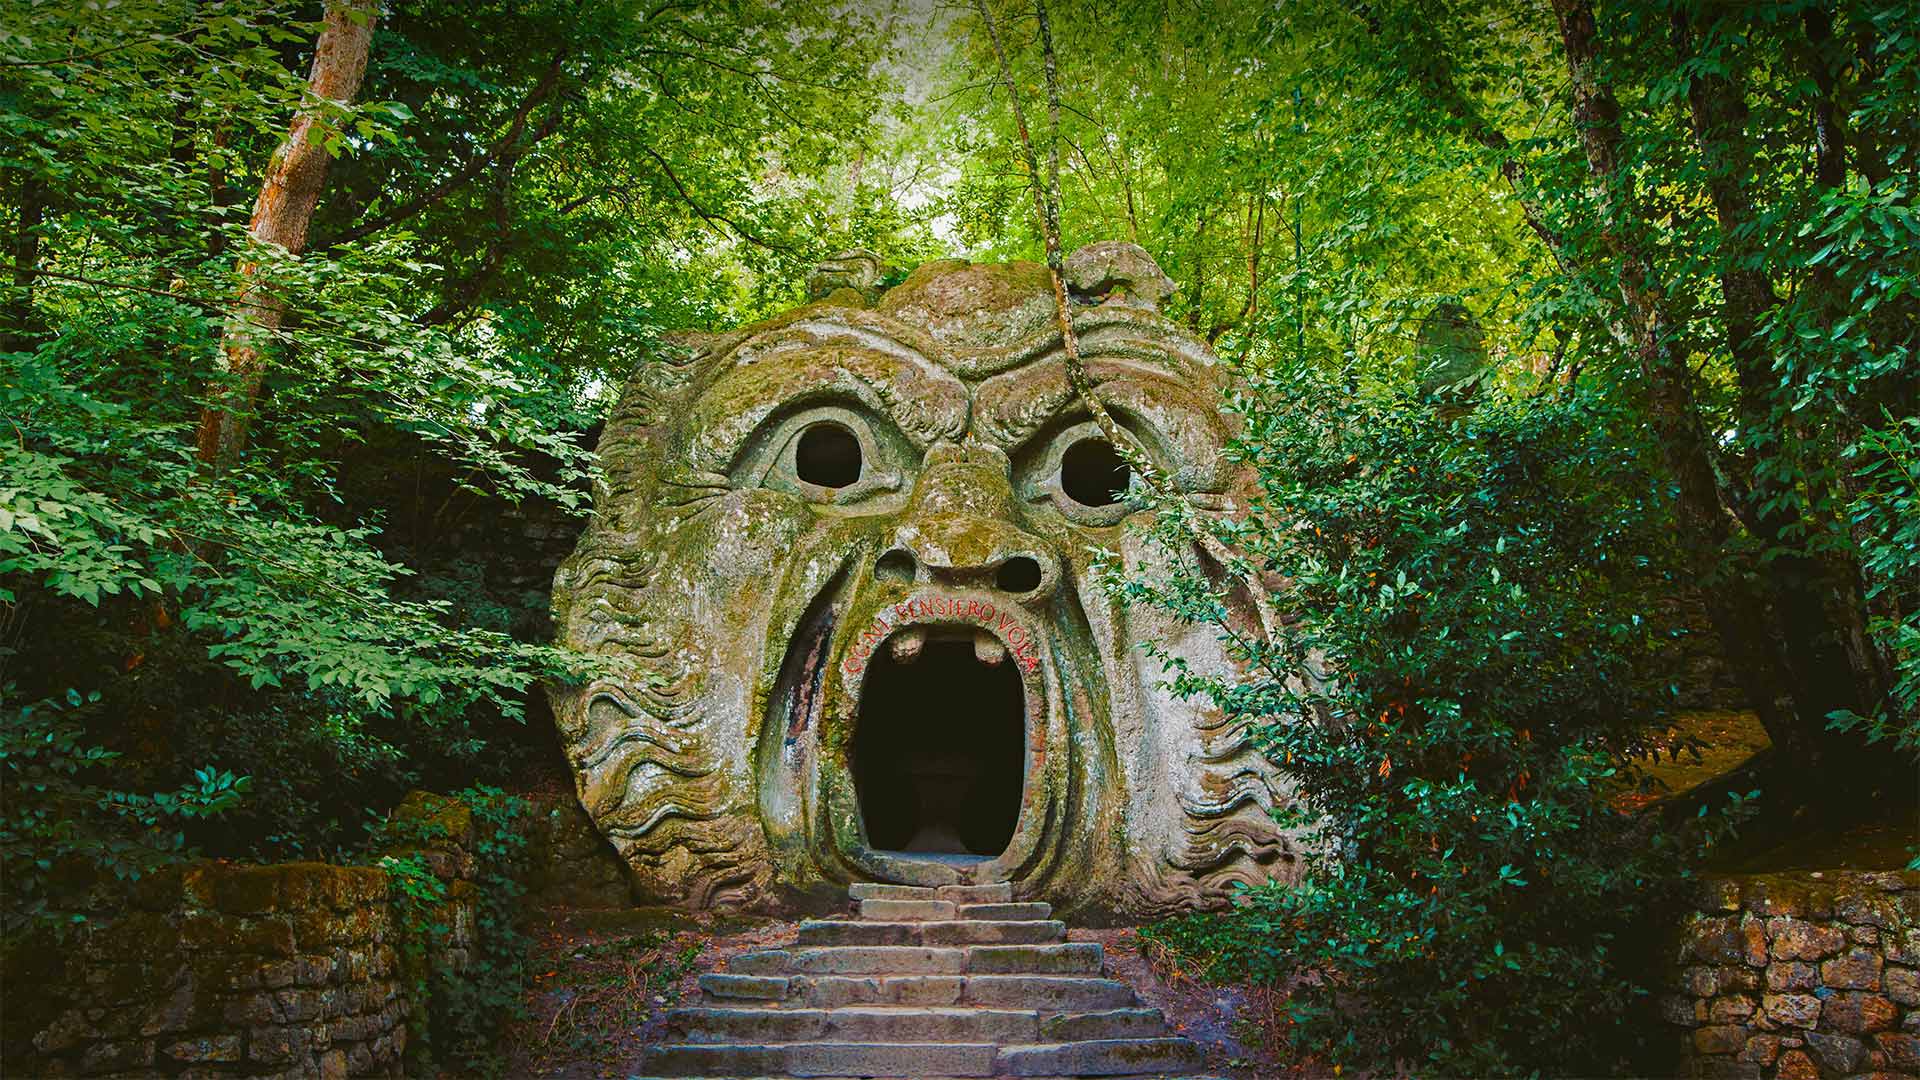 Orcus sculpture in the Gardens of Bomarzo in Bomarzo, Italy - Scott Wilson/Alamy)